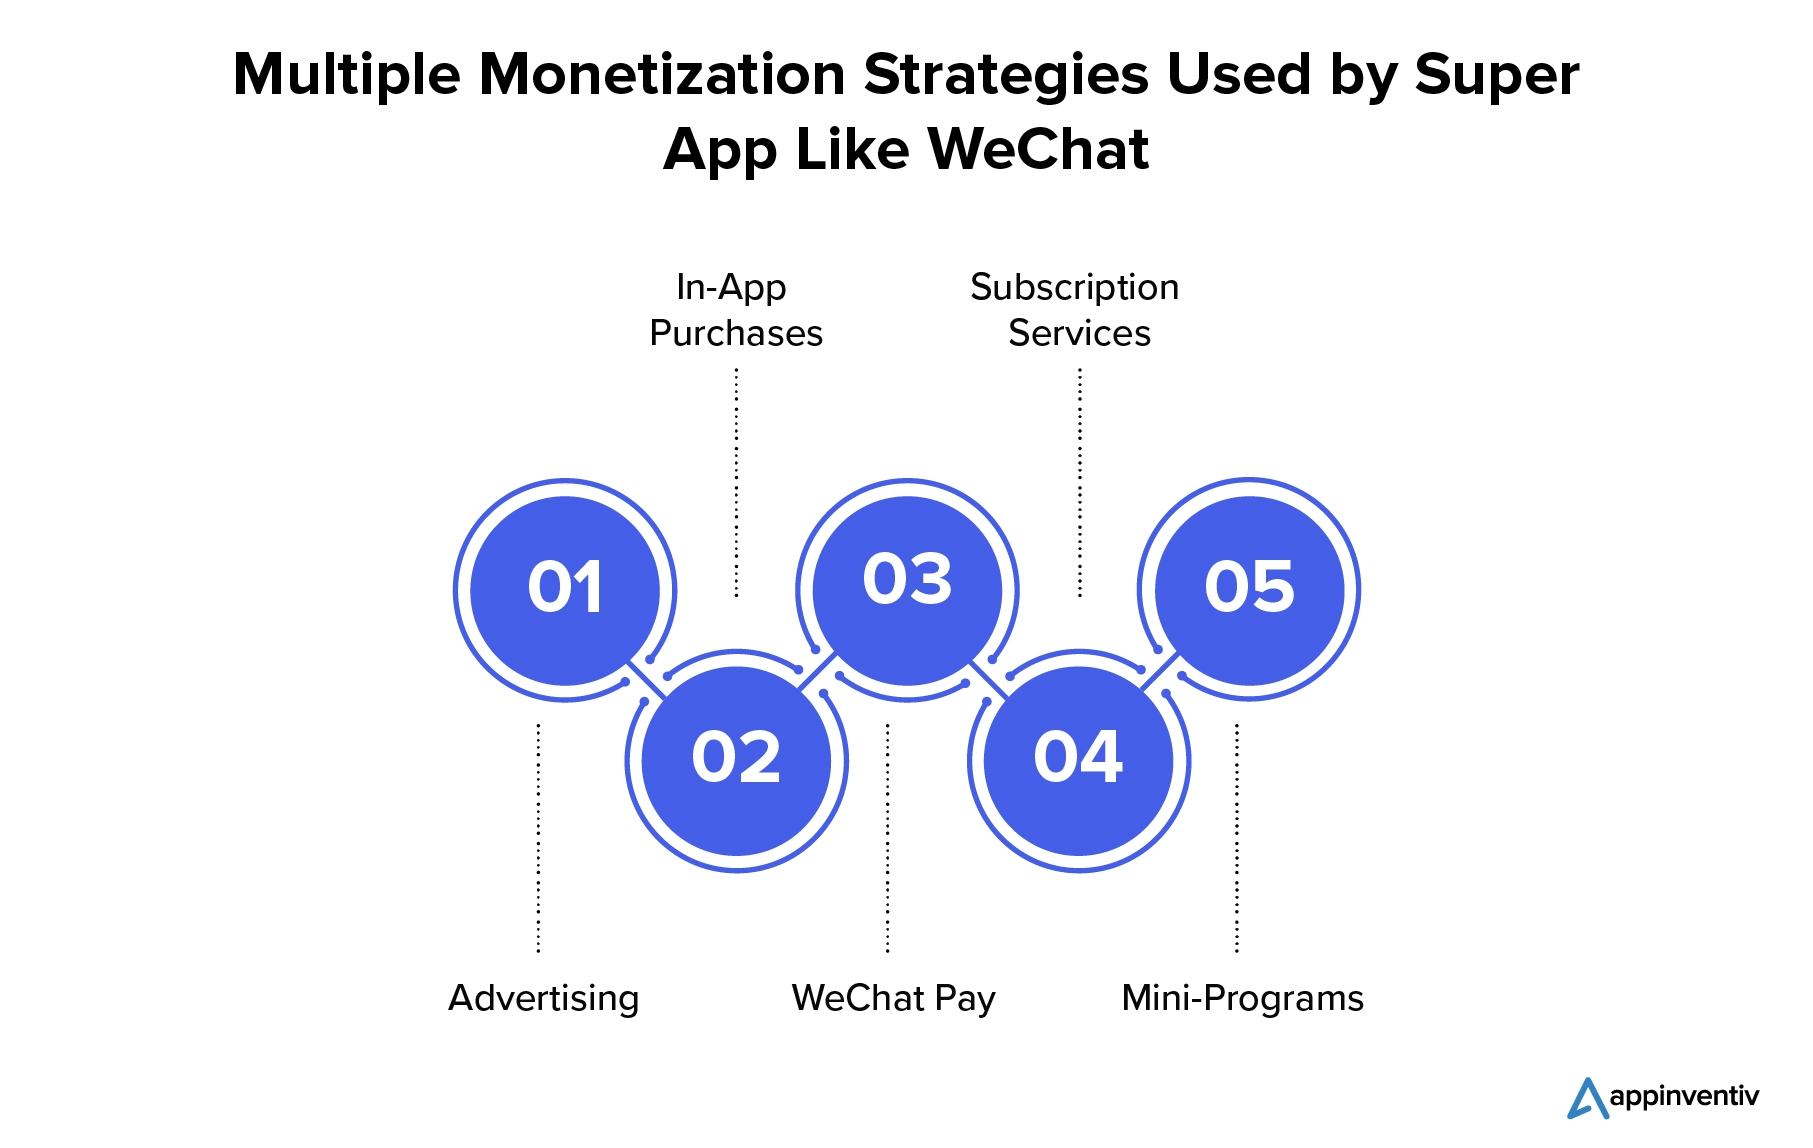 Multiple Monetization Strategies Used by Super App Like WeChat